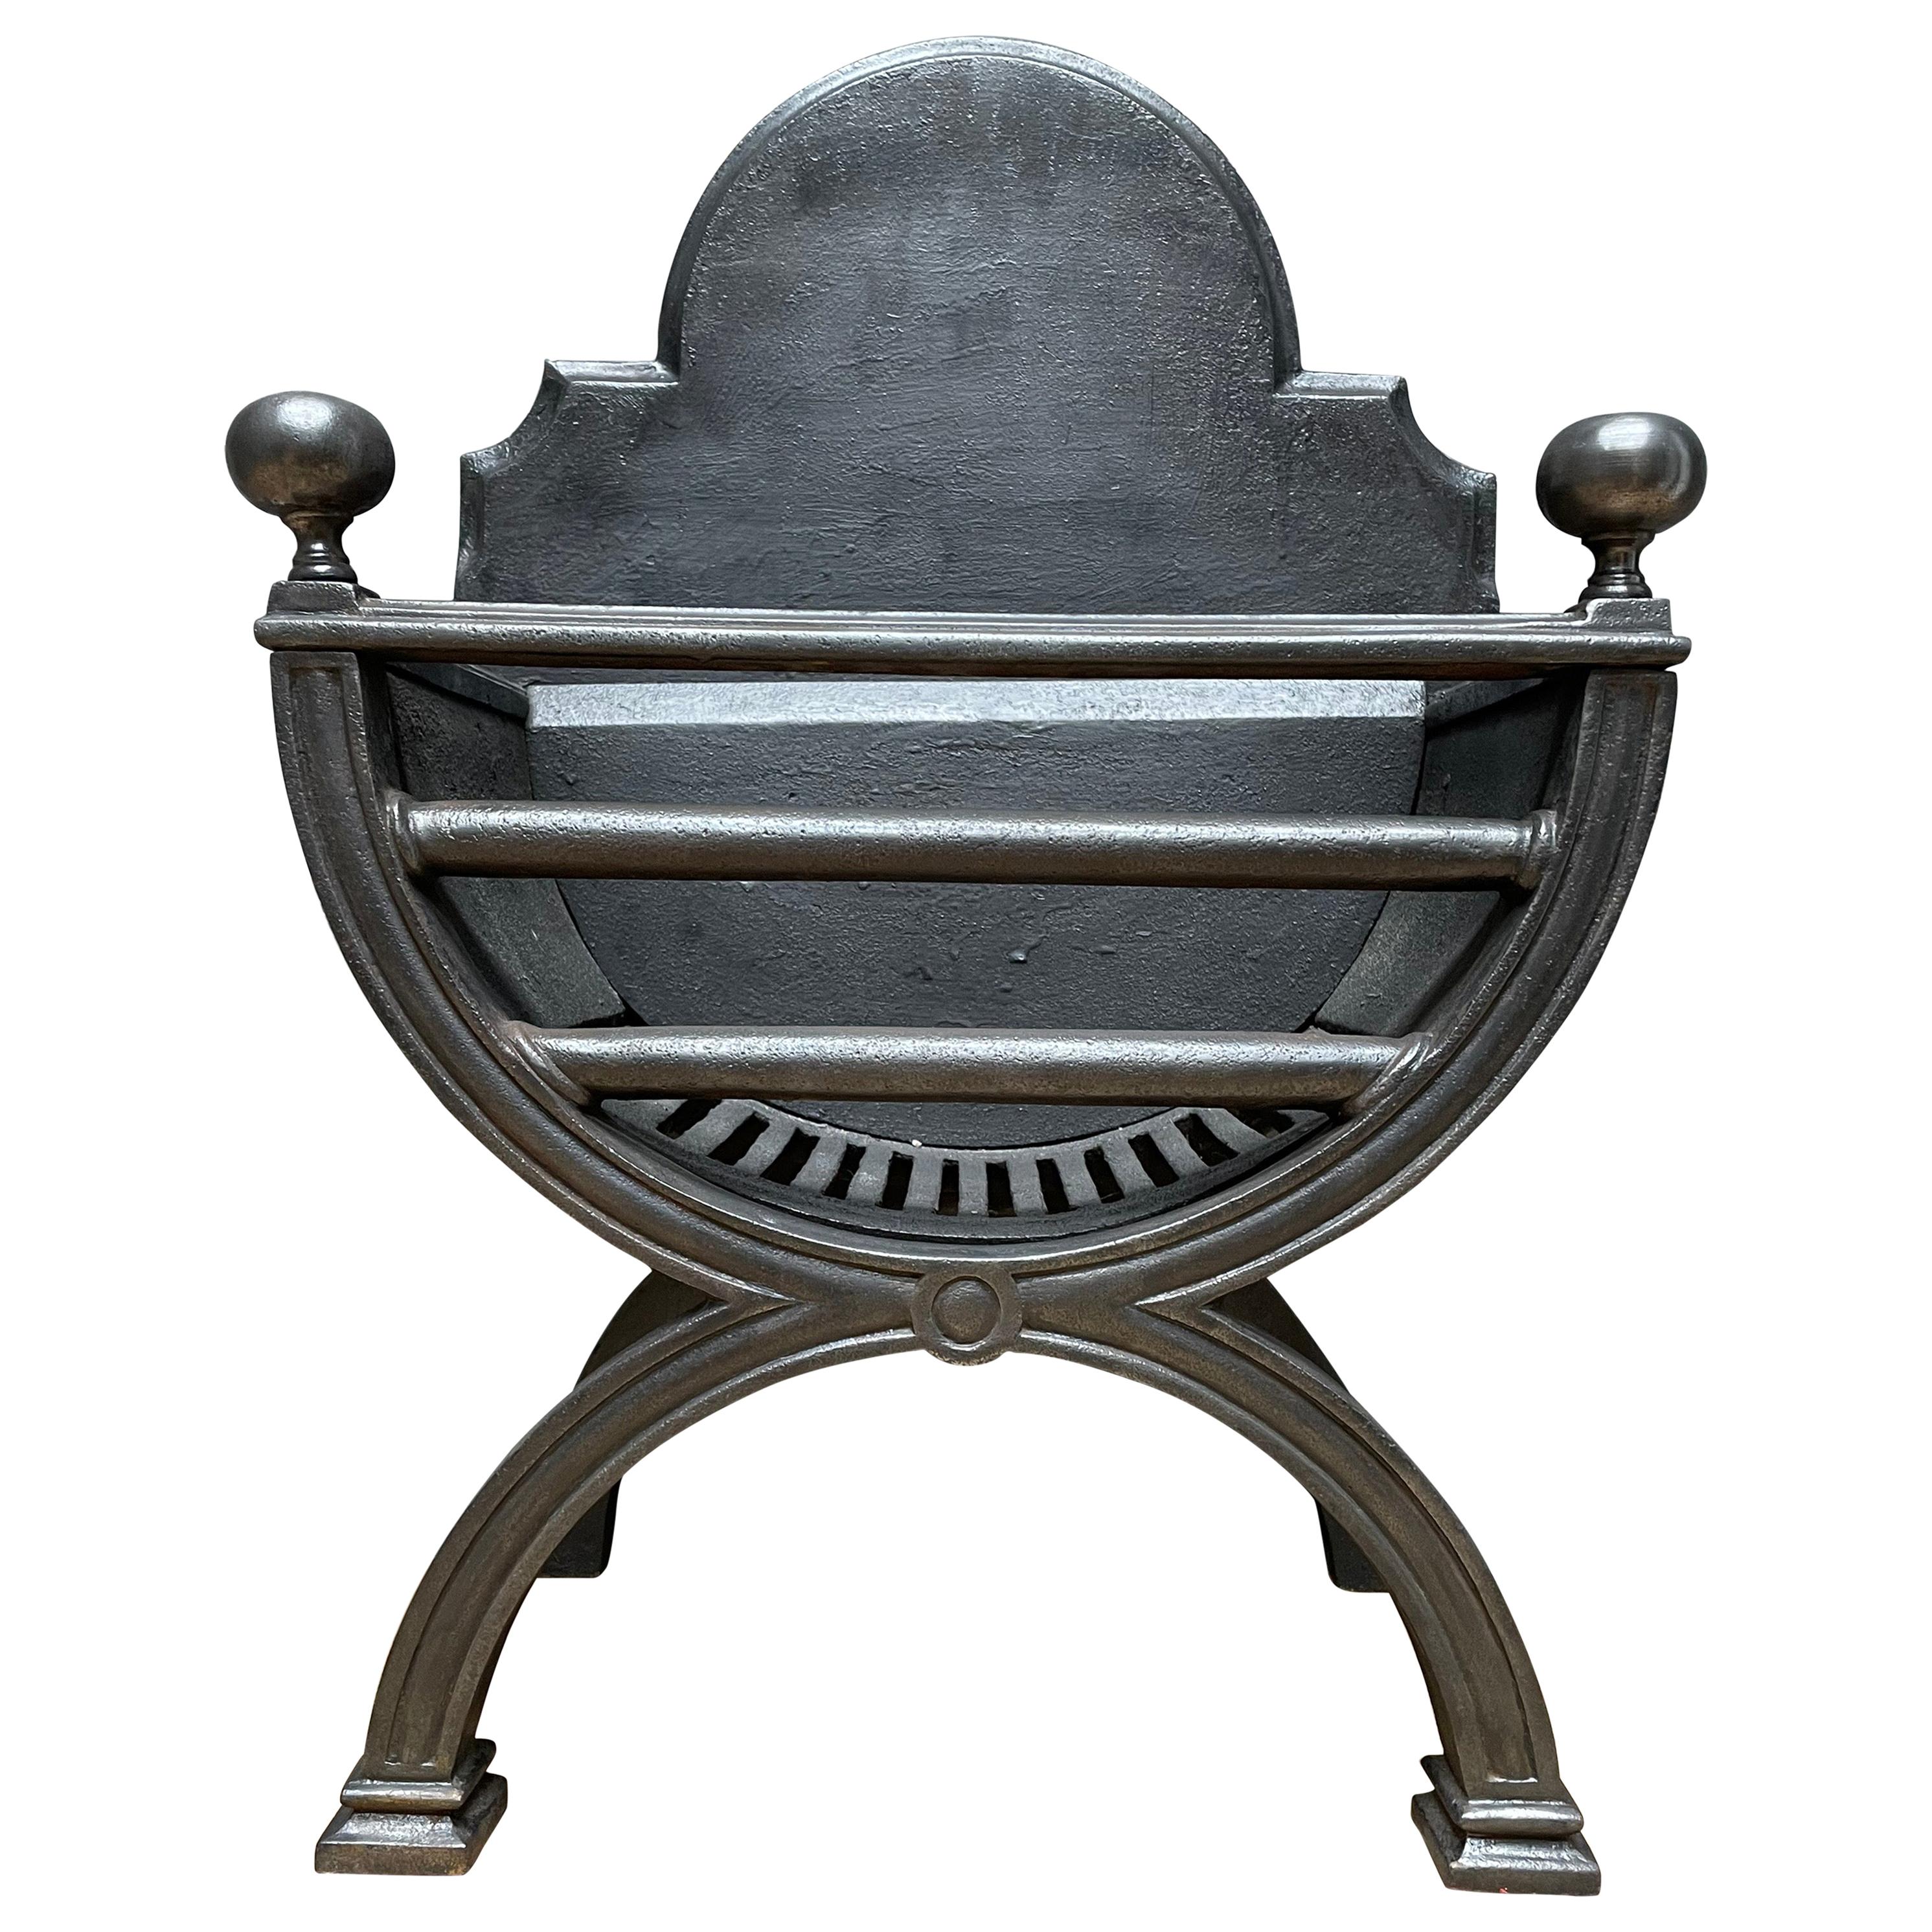 19th Century English Regency Style Polished Cast Iron Fire Grate